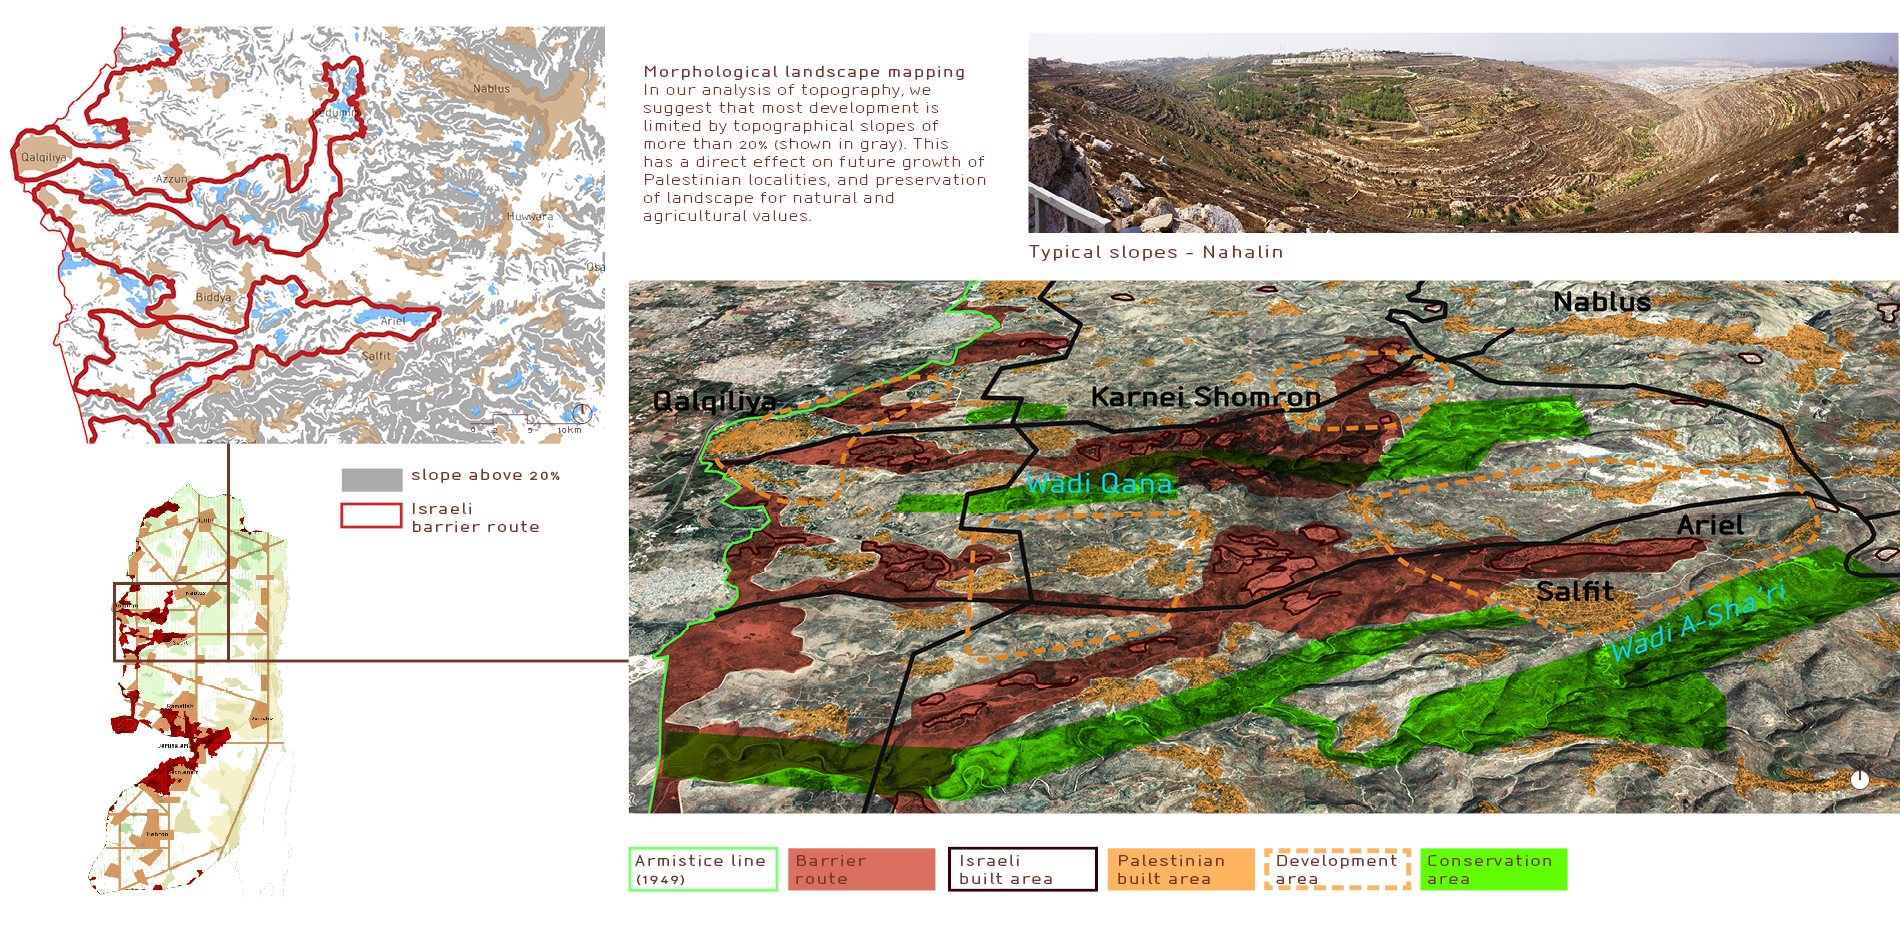 2.3. Palestinian open spaces and development - local example: Salfit. 